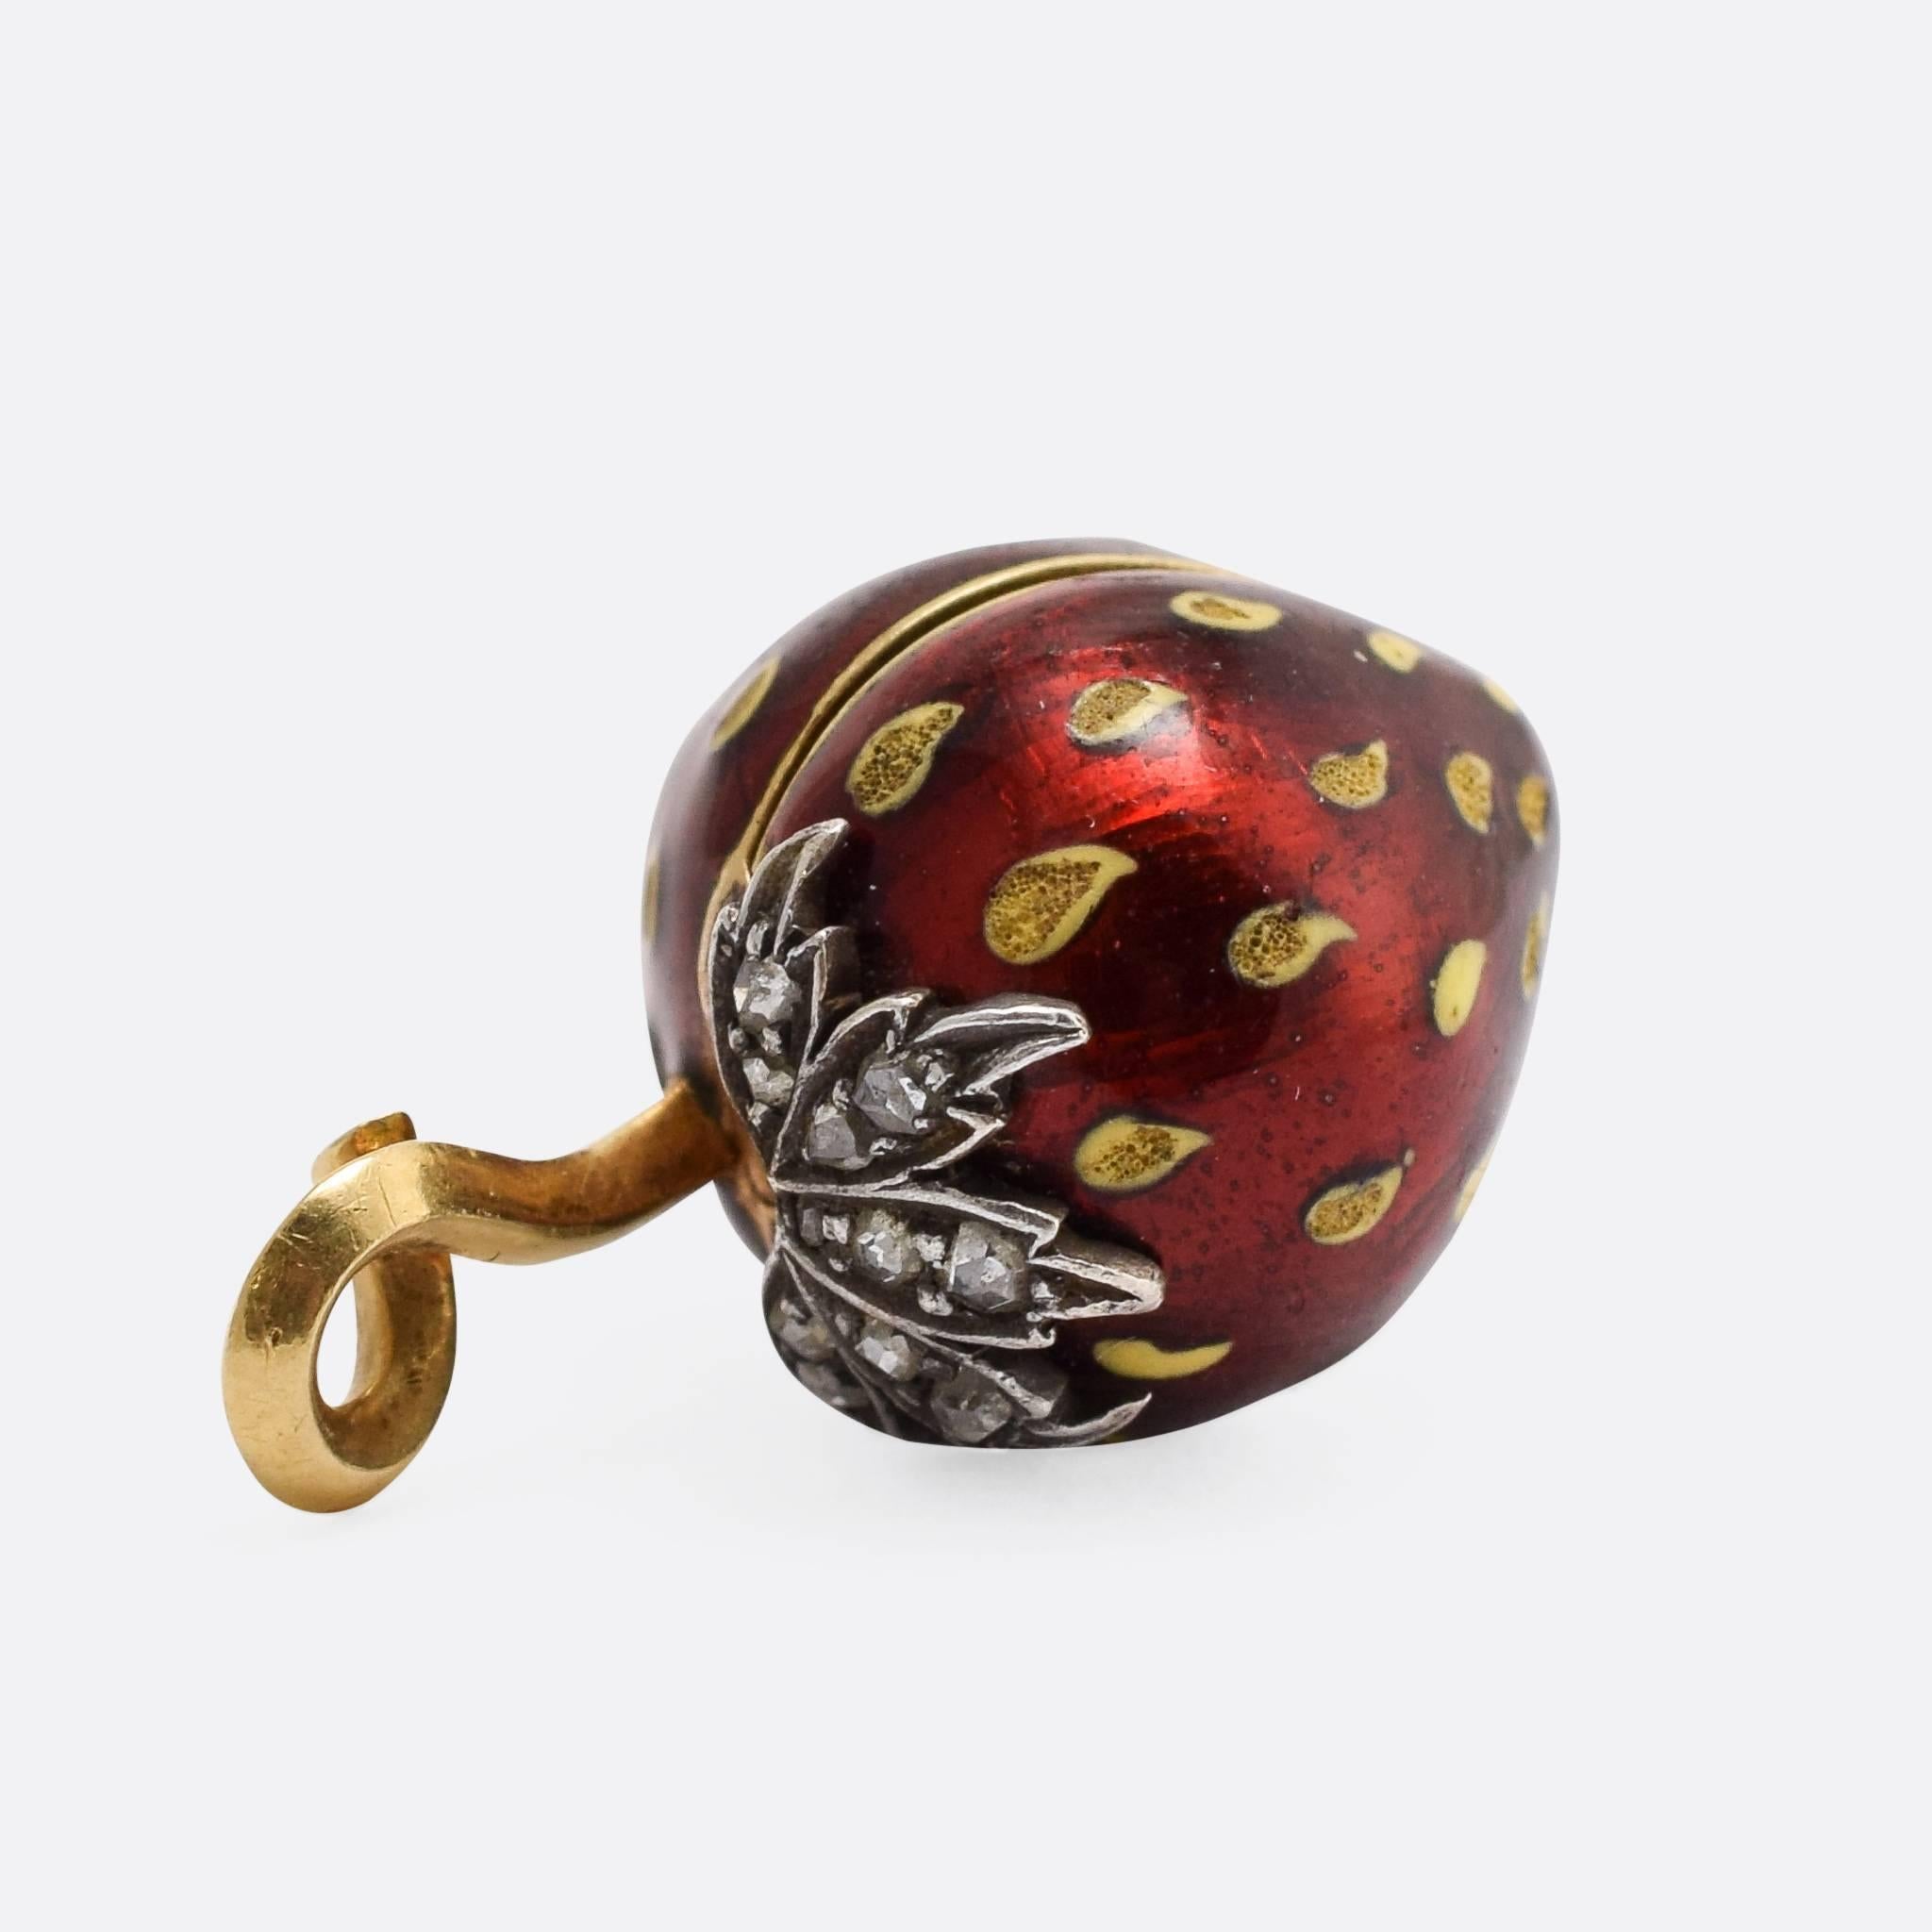 This incredibly cute antique strawberry locket was made in France in the late 19th Century. It's modelled in 18ct gold and finished in mouth-watering red enamel with diamond-set leaves. The top is hinged, and opens to reveal a compartment for an